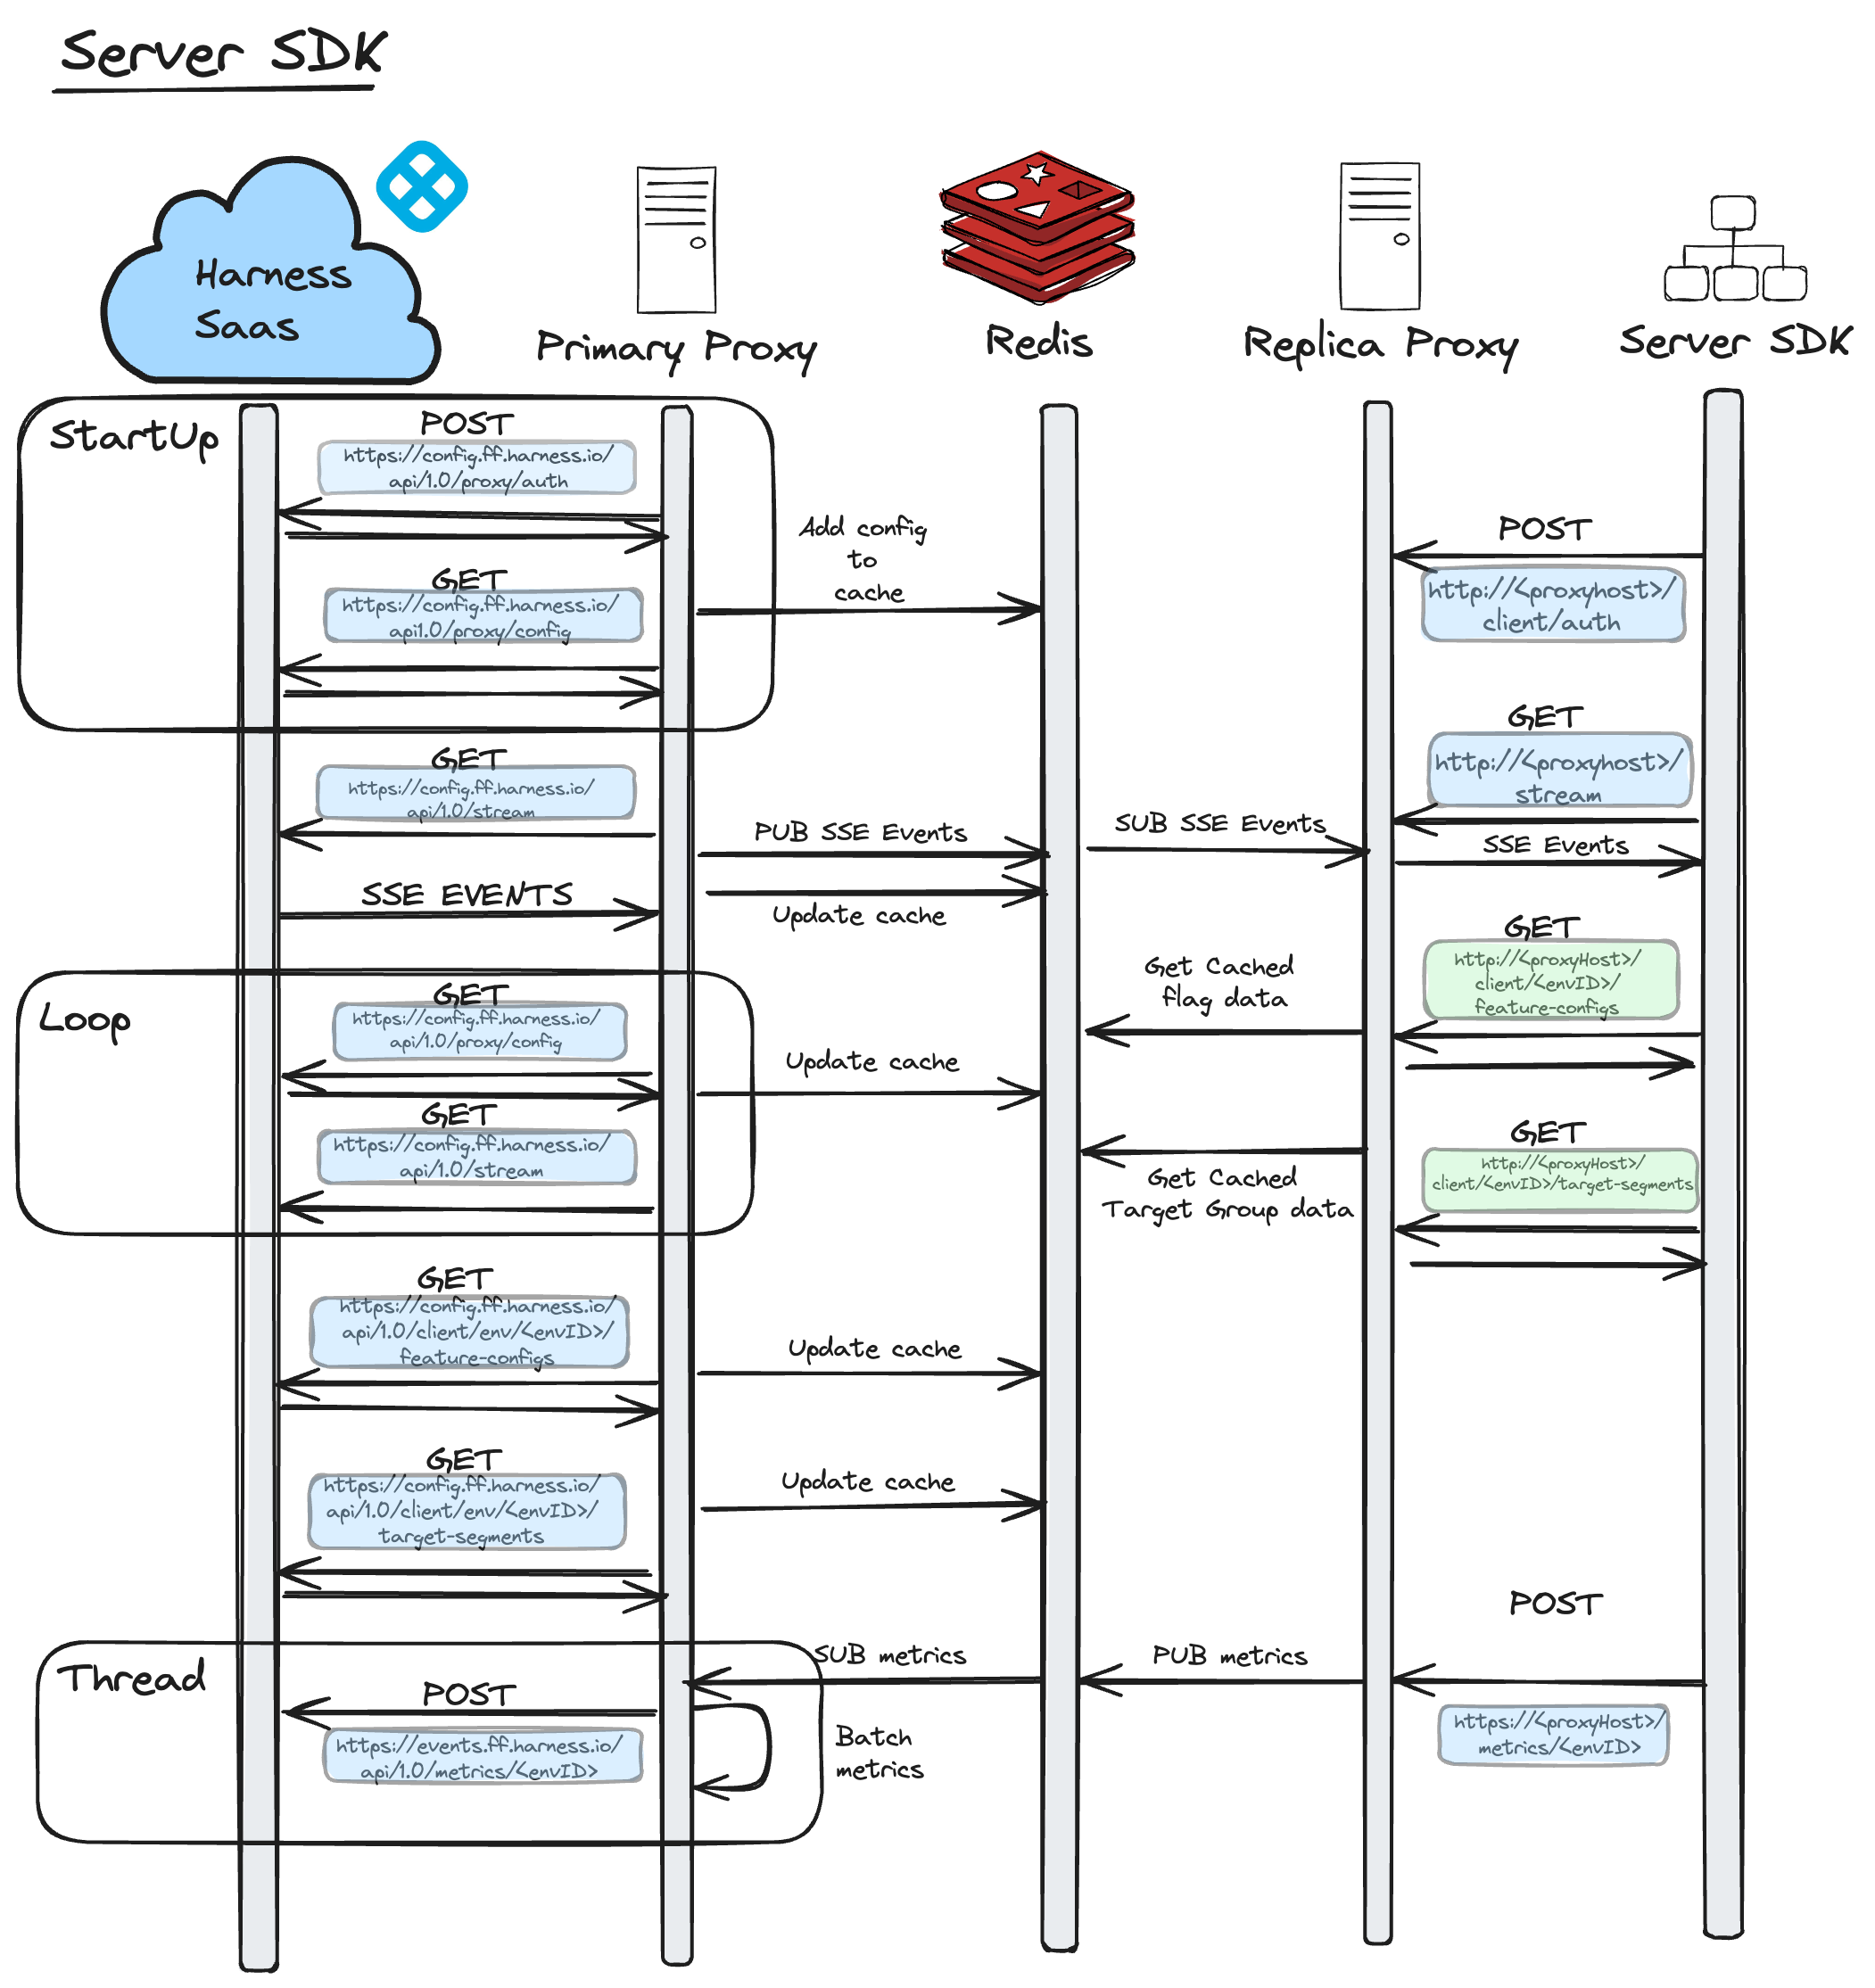 A in-depth diagram of the Relay Proxy V2 Network Architecture for the Server SDK. 